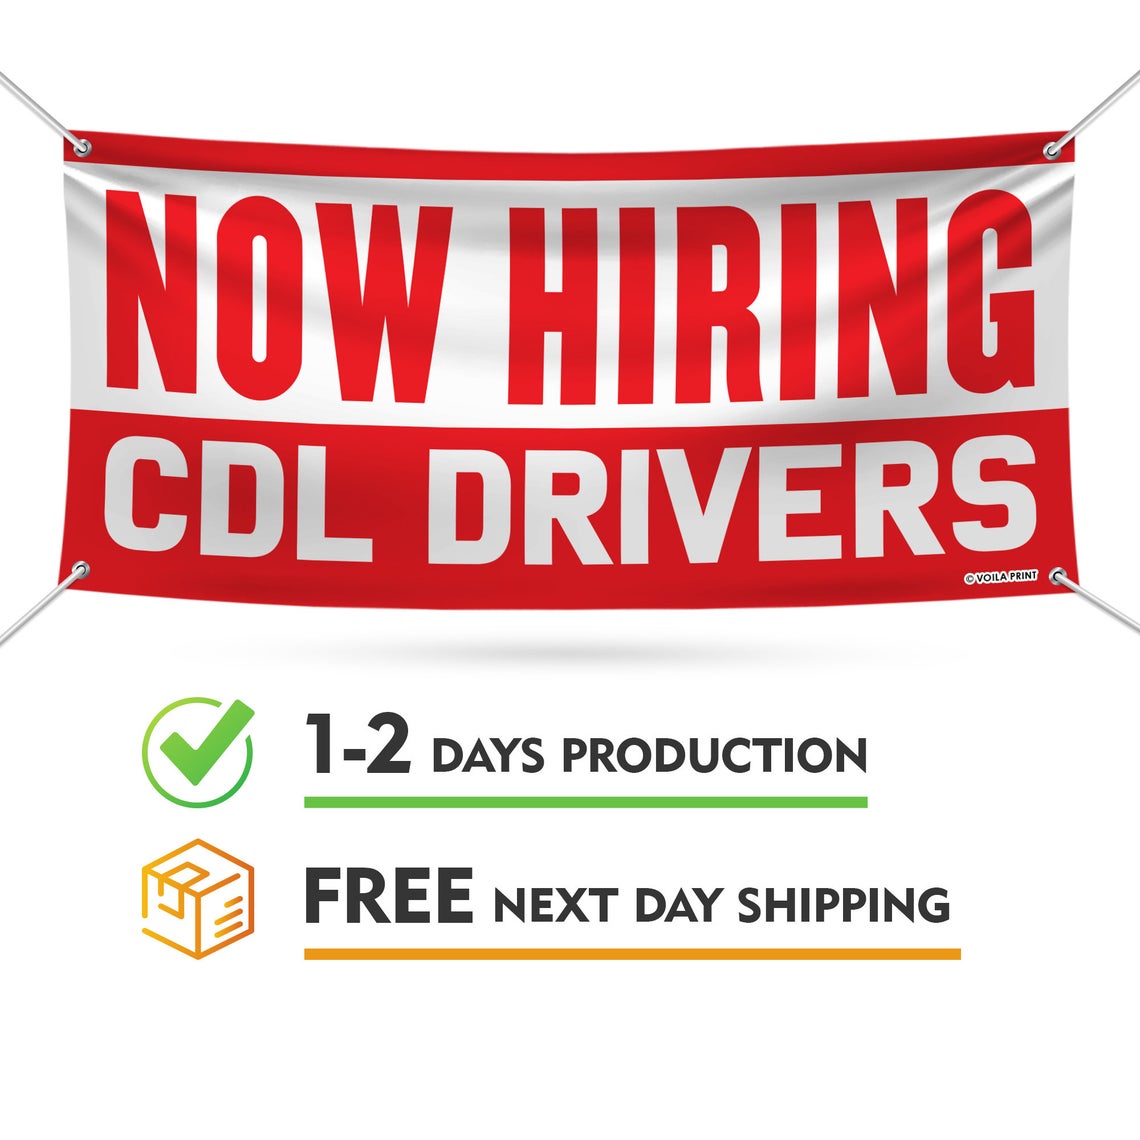 Heavy-Duty Vinyl Single-Sided with Metal Grommets Non-Fabric CDL Drivers Now Hiring Extra Large 13 oz Banner